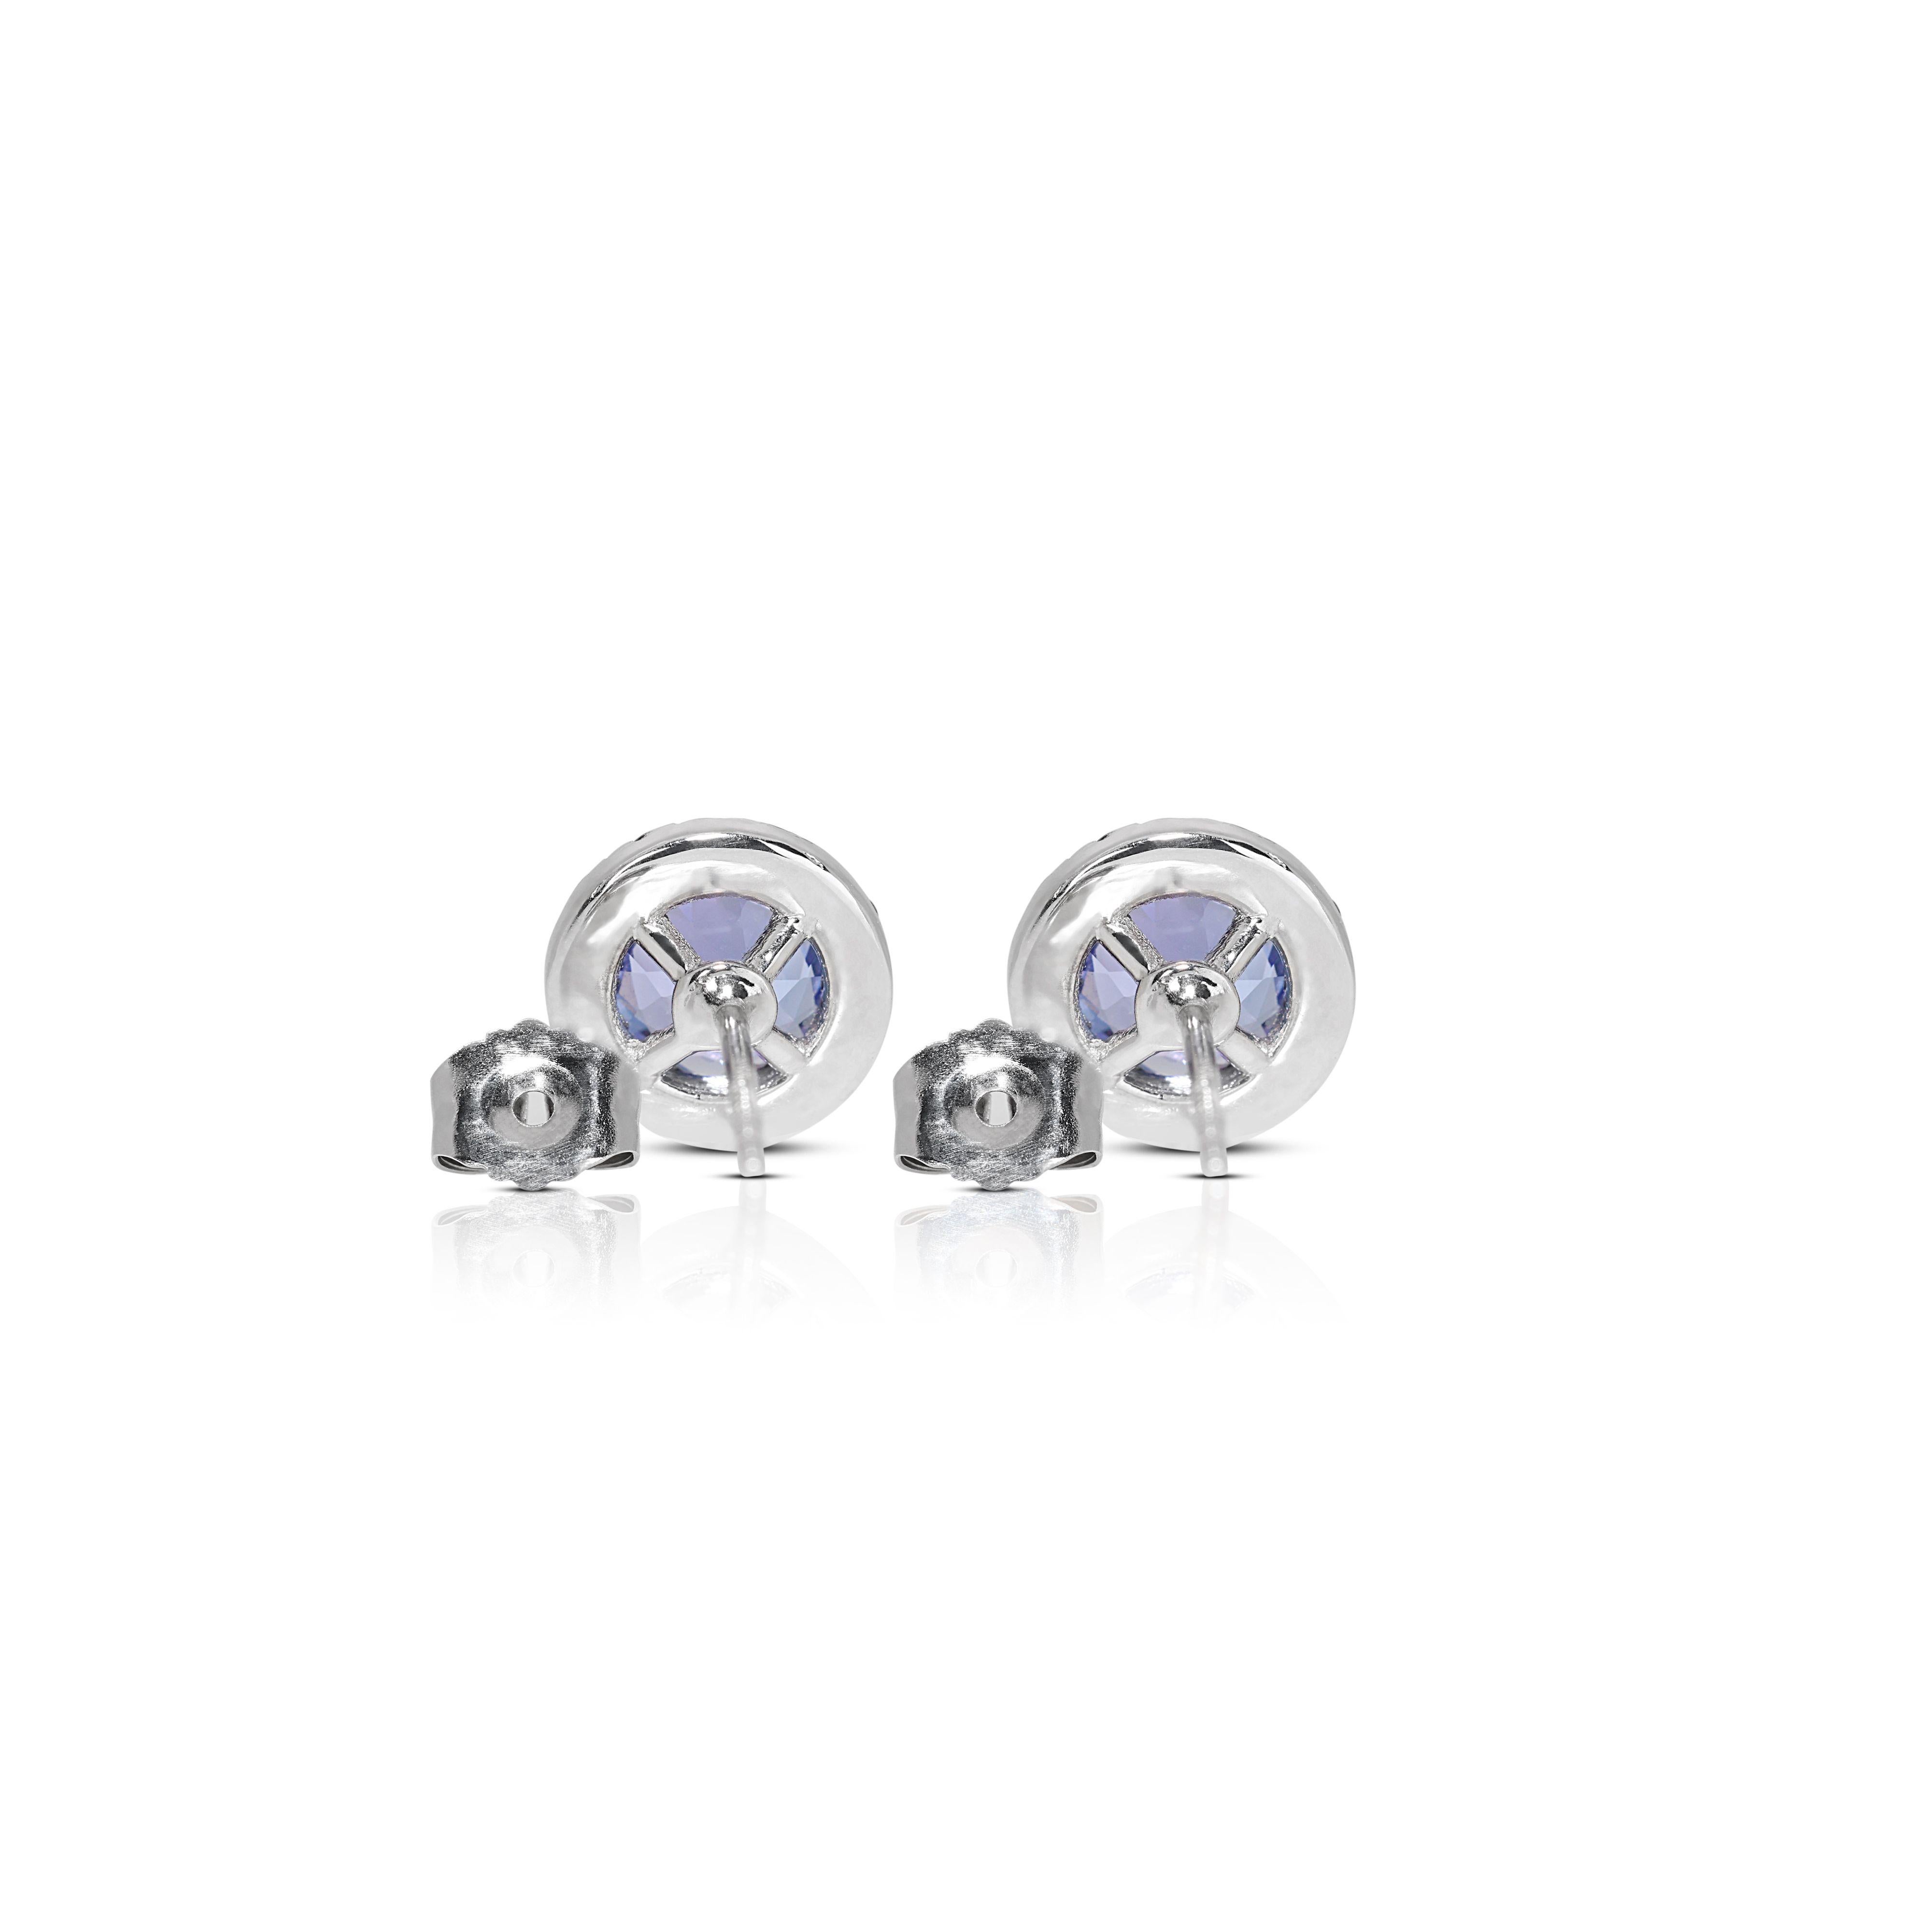 Round Cut 18k White Gold Stud Halo Earrings with 1.83 ct Natural Diamonds GIA Cert